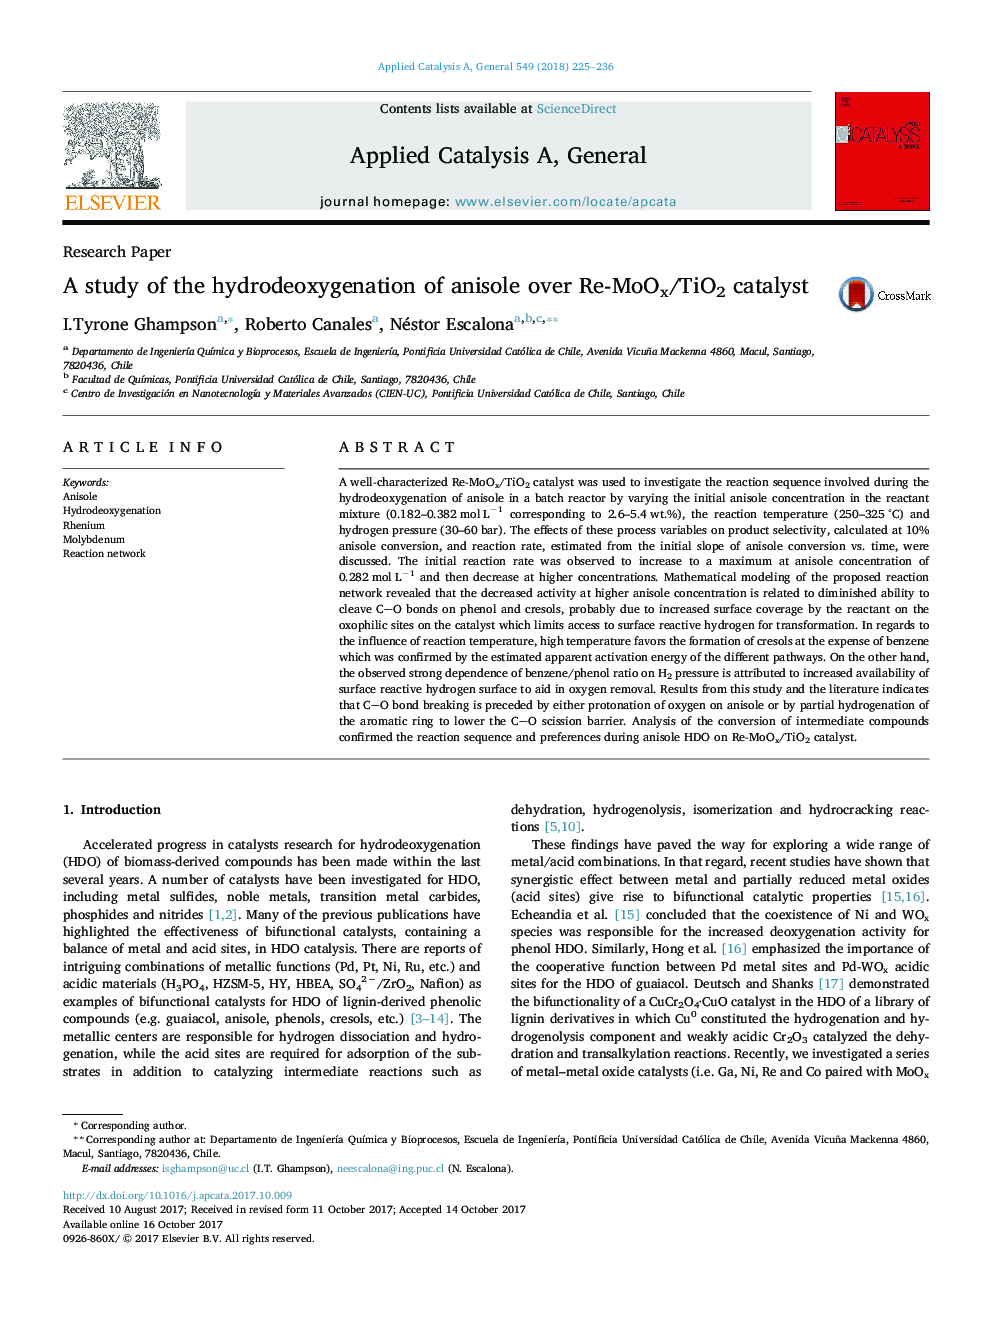 Research PaperA study of the hydrodeoxygenation of anisole over Re-MoOx/TiO2 catalyst